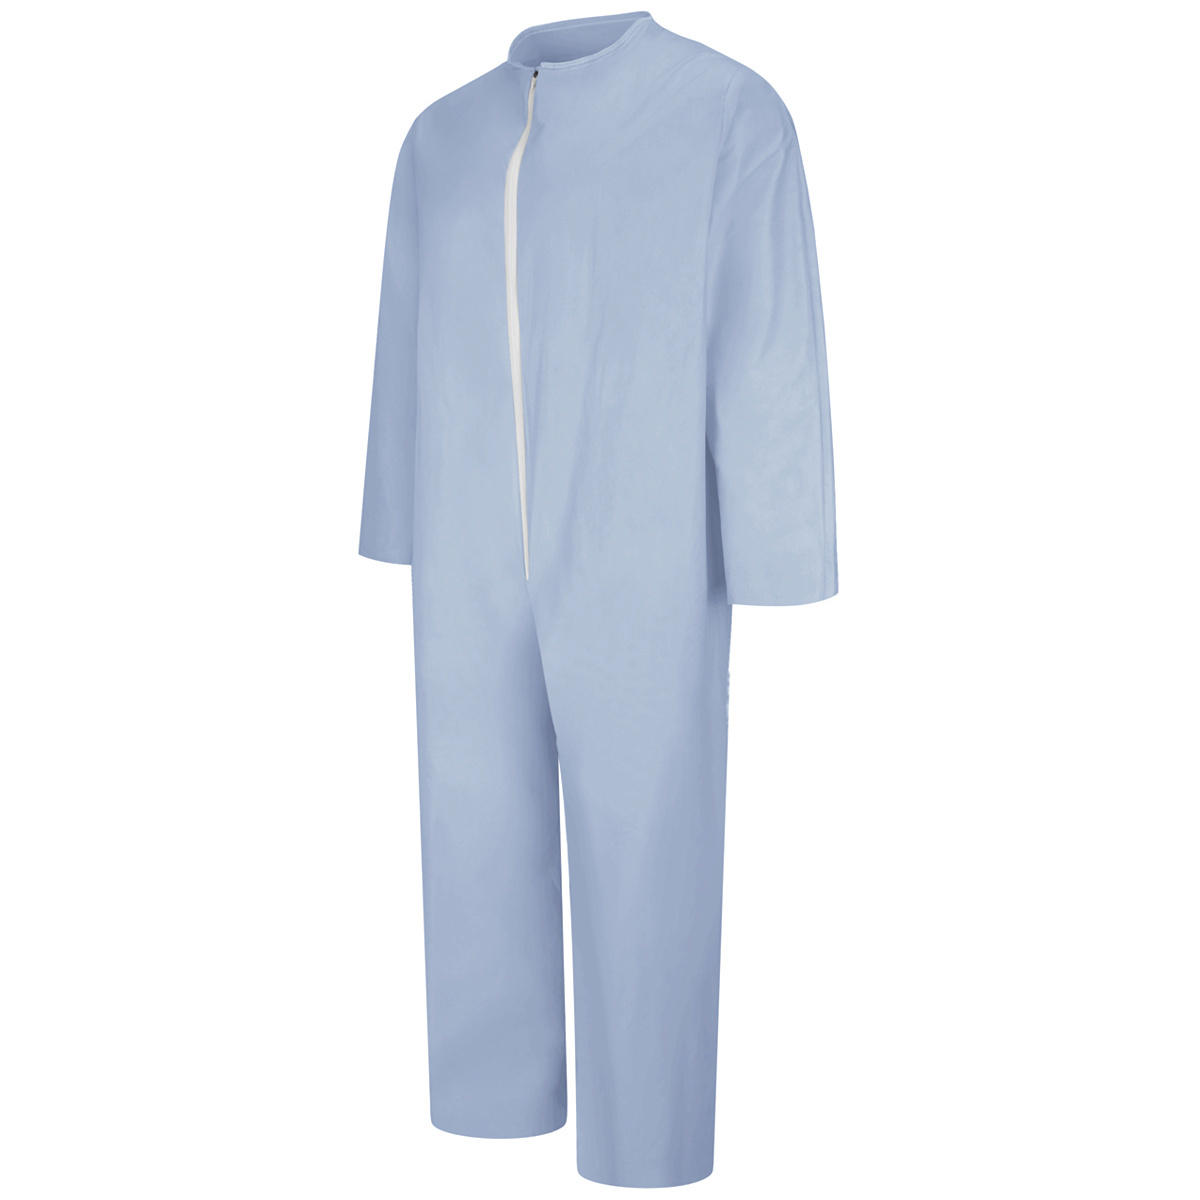 Bulwark® 3X Blue Flame-resistant, Sontara® Disposable Coveralls (Availability restrictions apply.)